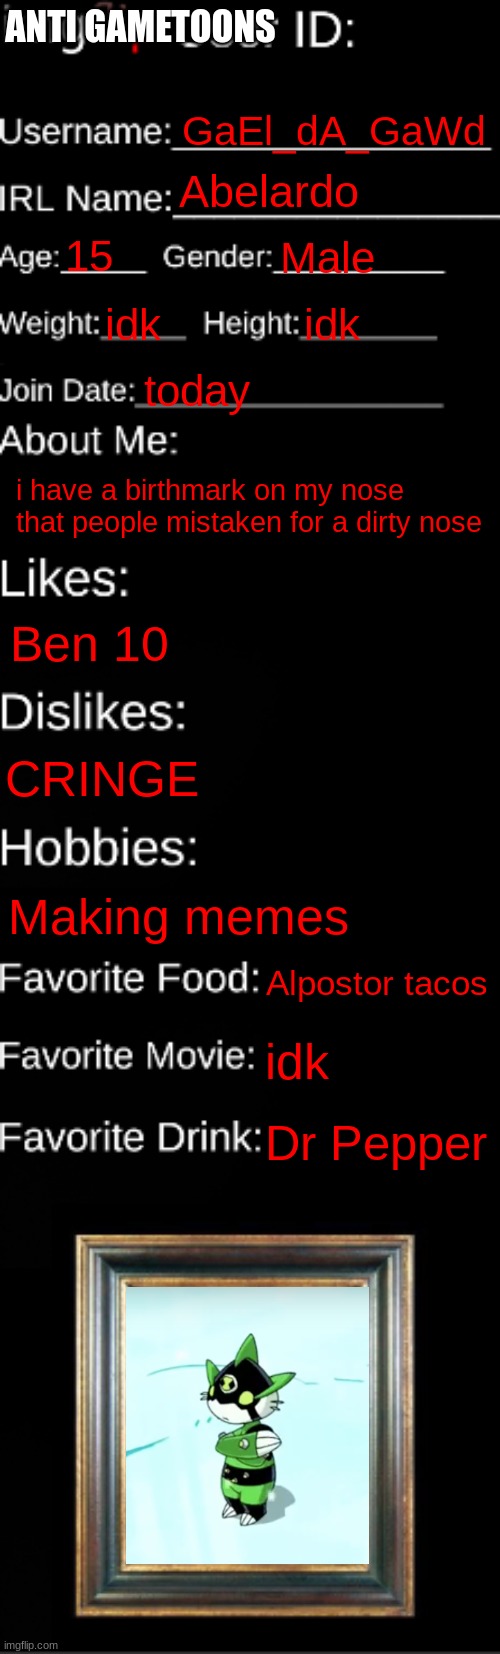 imgflip ID Card | ANTI GAMETOONS; GaEl_dA_GaWd; Abelardo; 15; Male; idk; idk; today; i have a birthmark on my nose that people mistaken for a dirty nose; Ben 10; CRINGE; Making memes; Alpostor tacos; idk; Dr Pepper | image tagged in imgflip id card | made w/ Imgflip meme maker